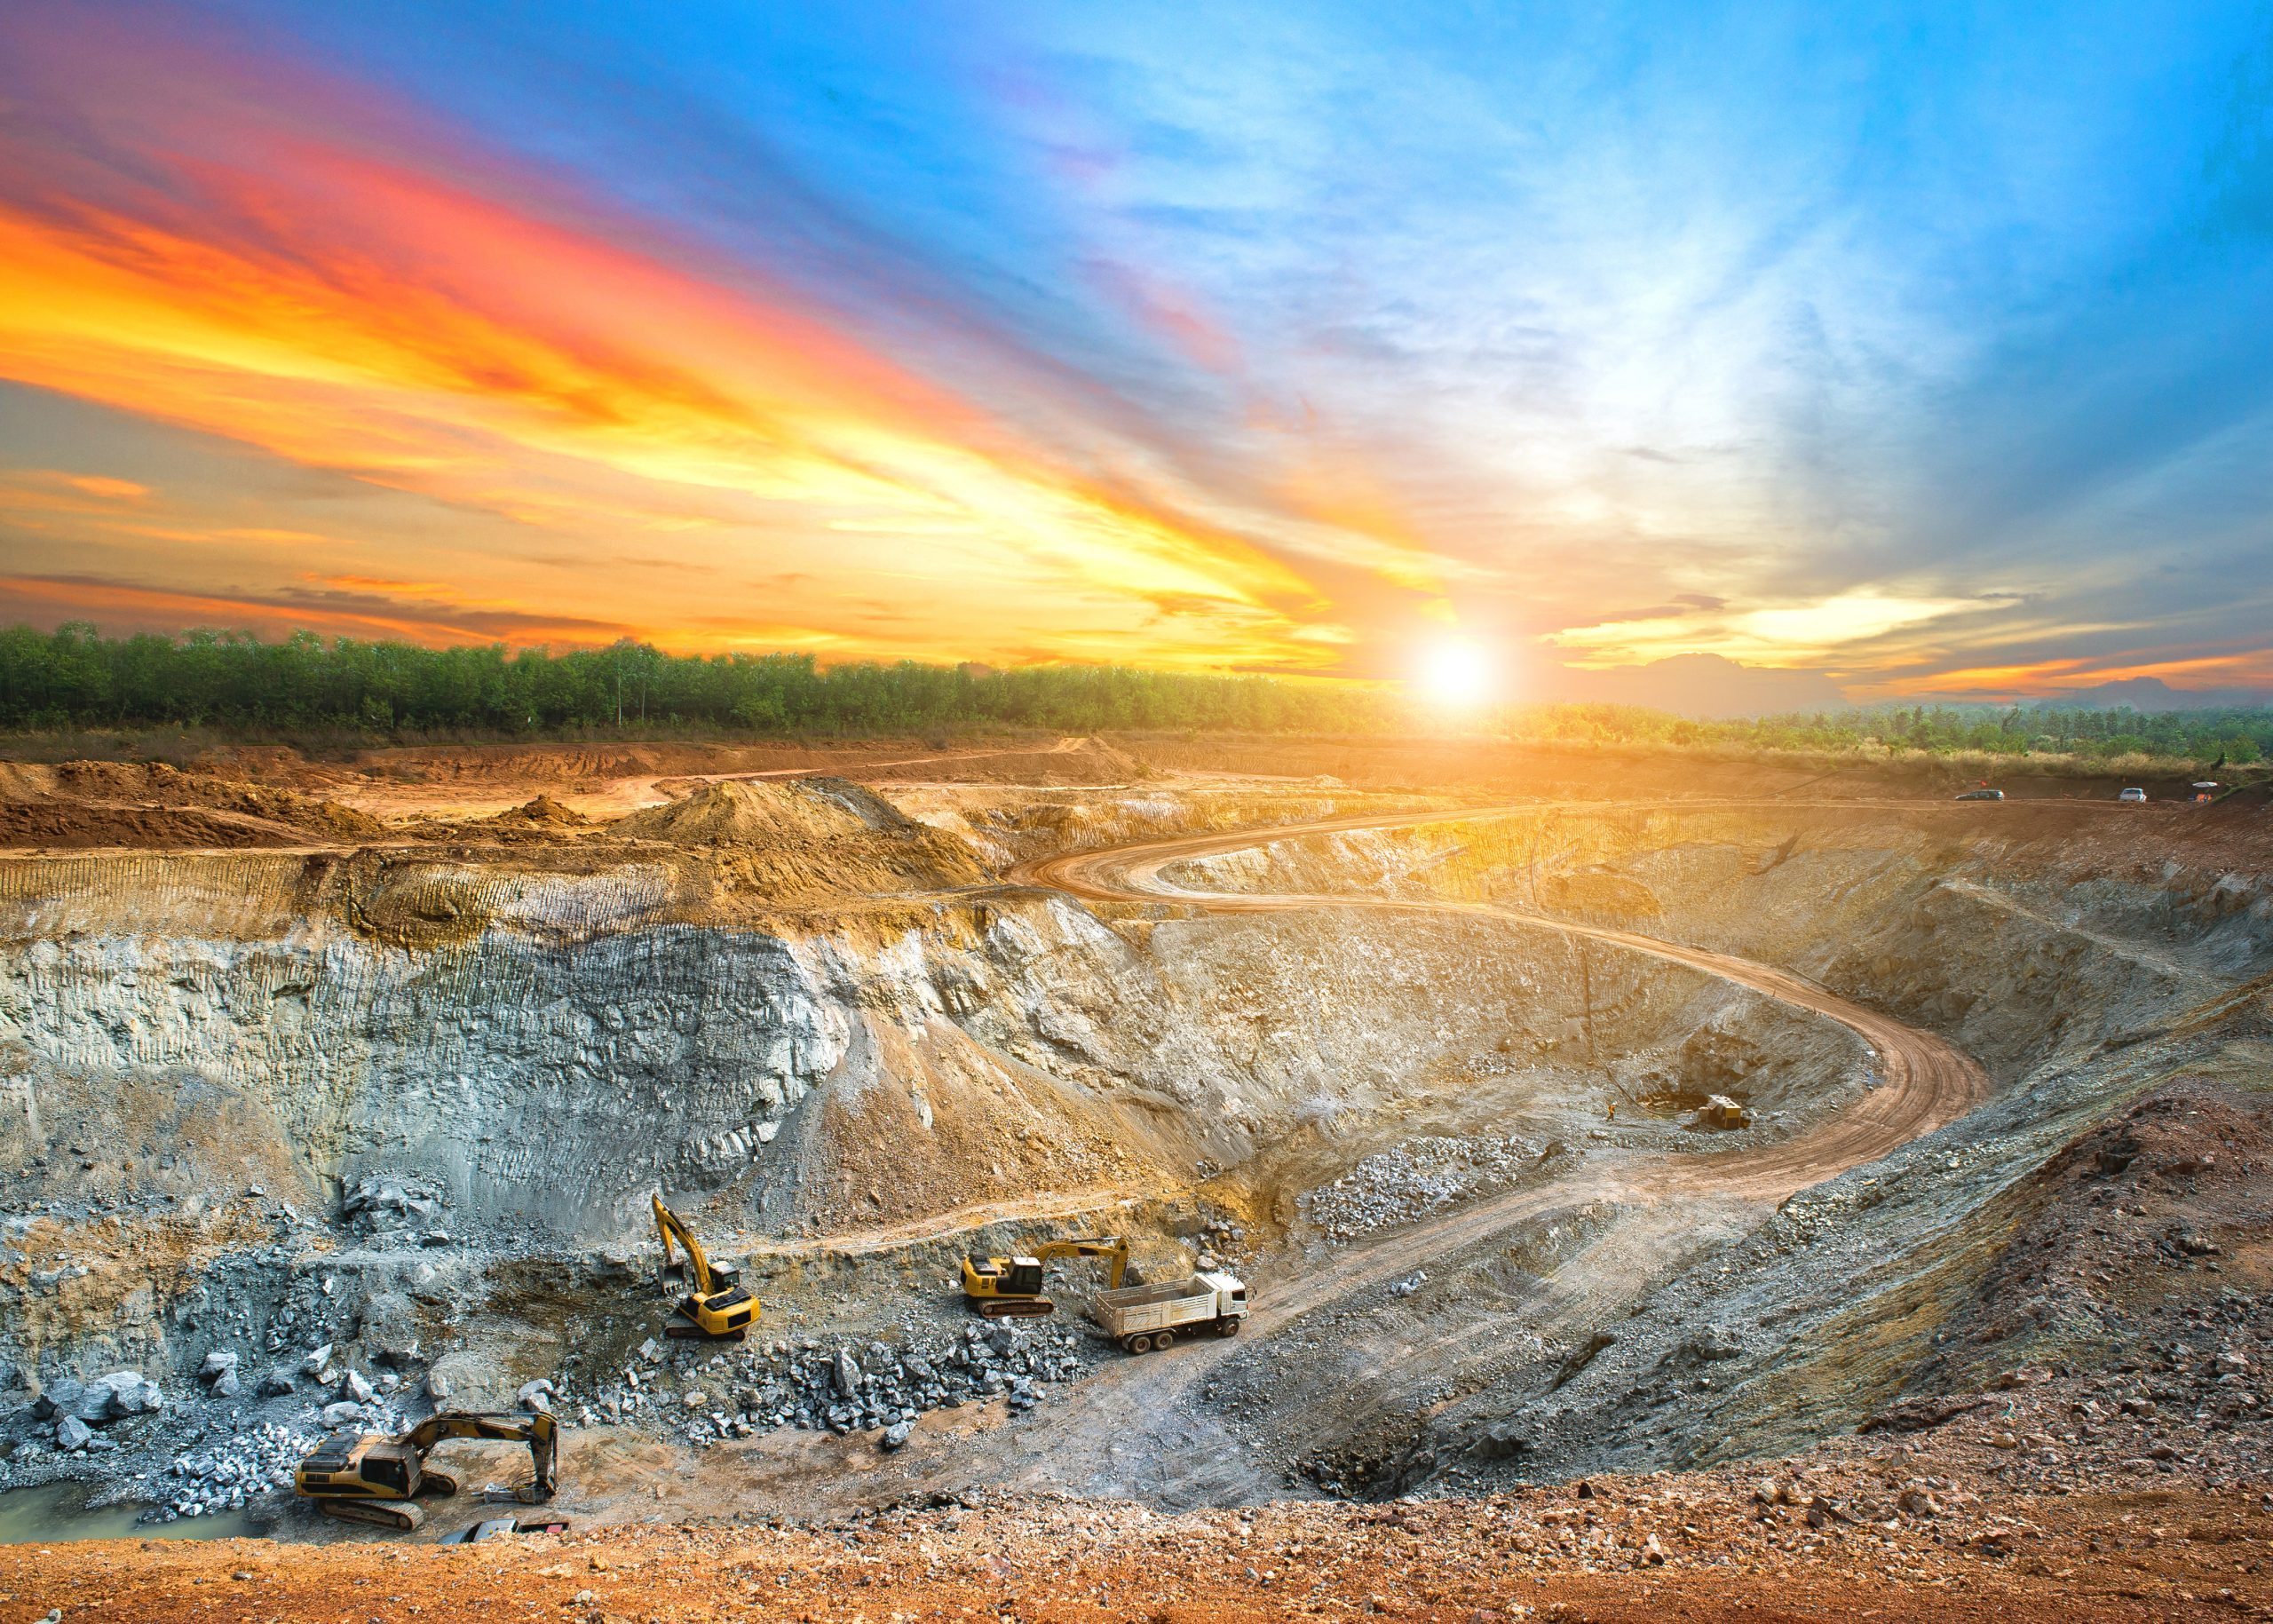 Sustainability and the need for mining